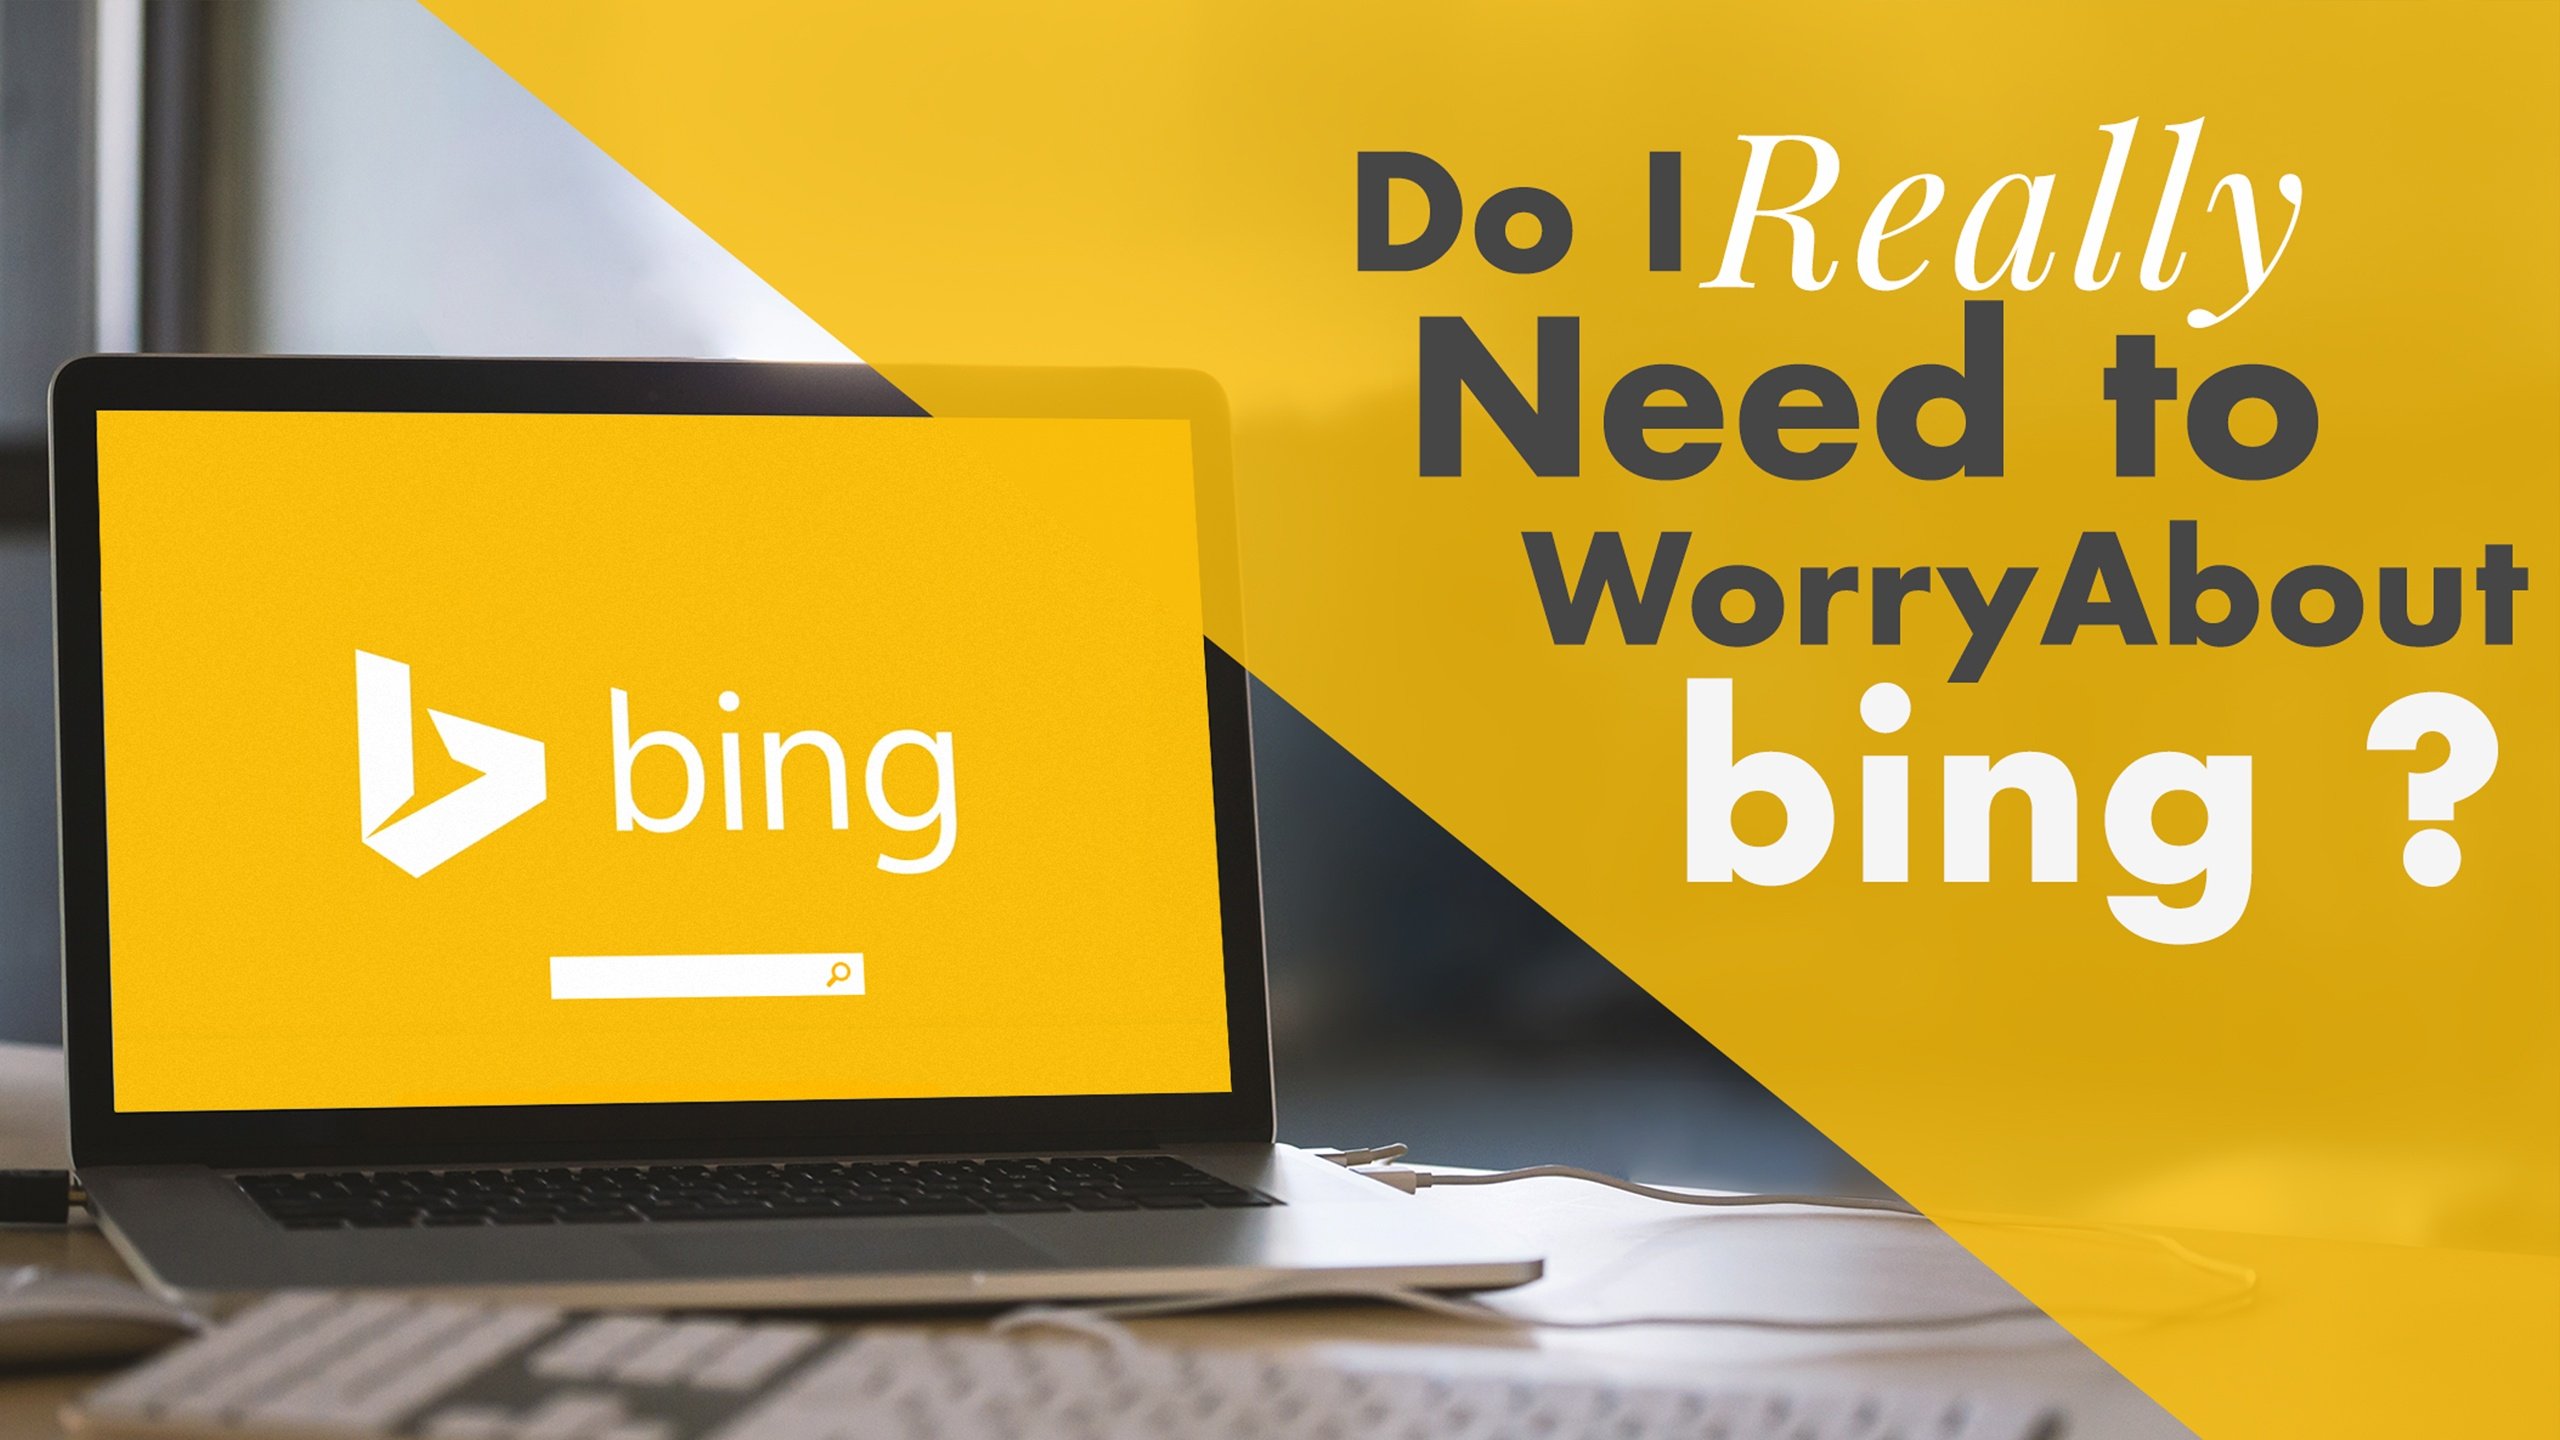 Do-I-Really-Need-to-Worry-About-Bing-5.jpg